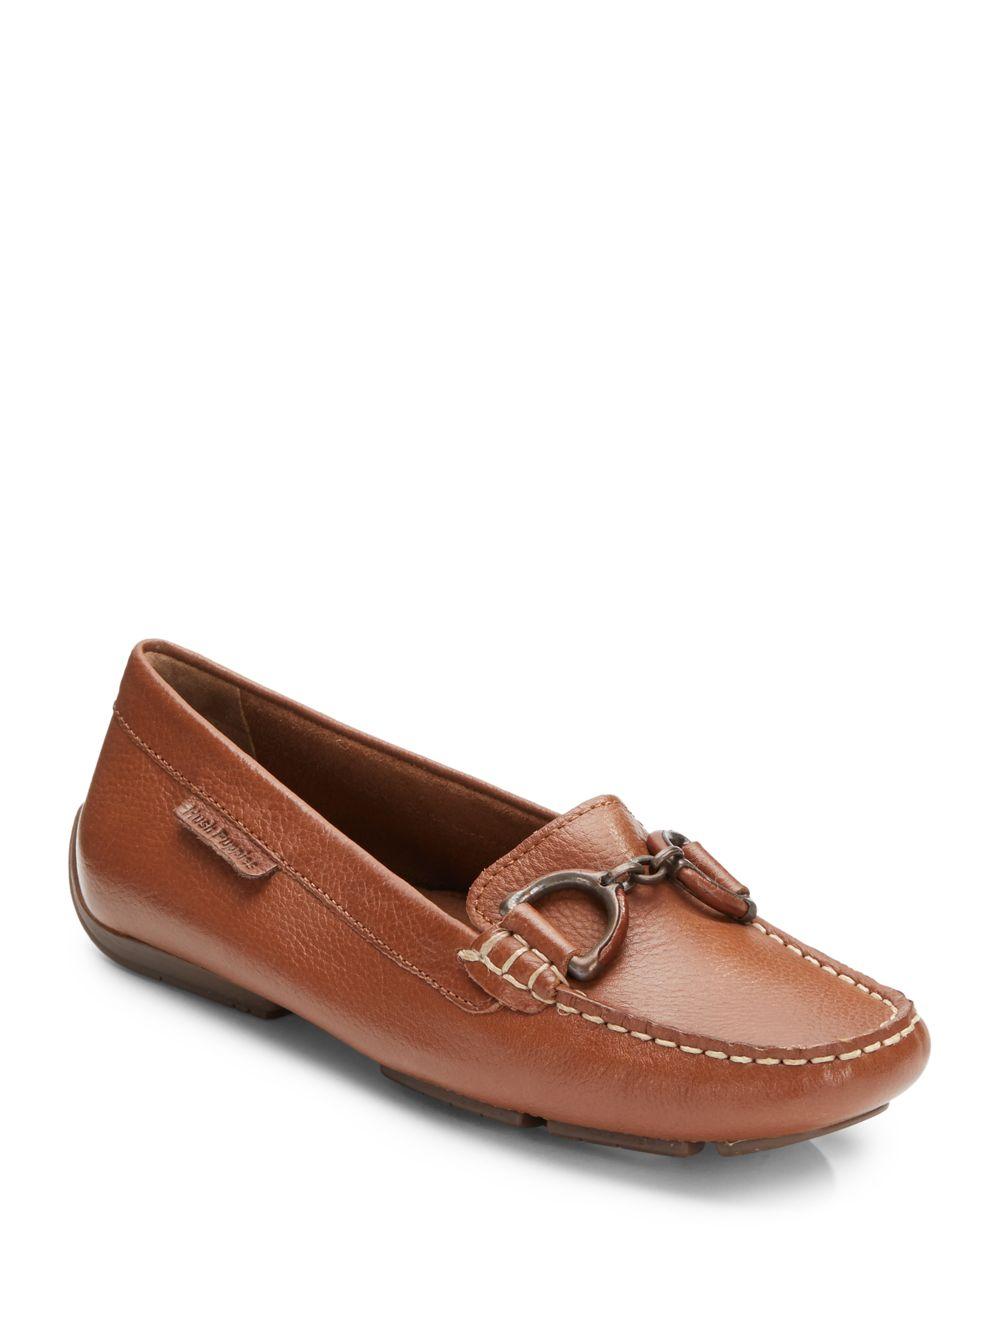 Hush Puppies Cora Leather Loafers in Brown - Lyst